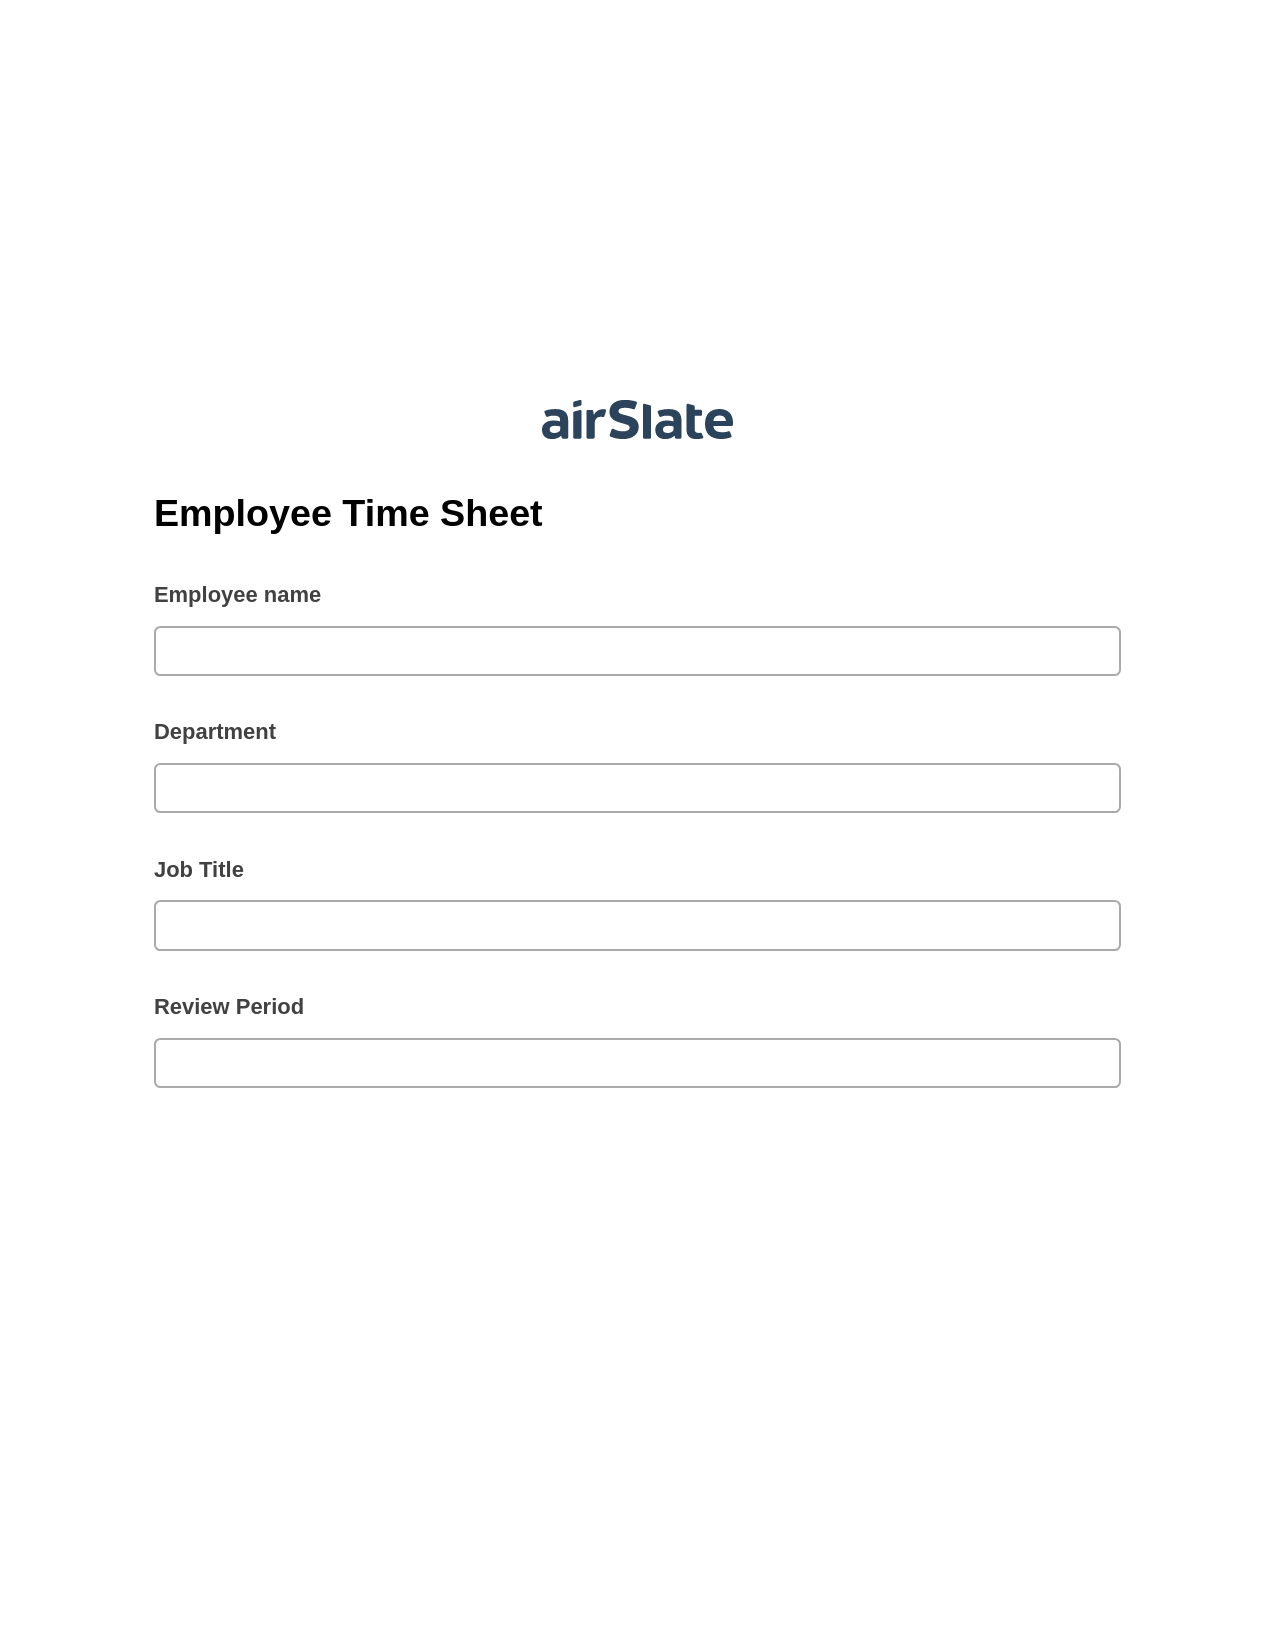 Multirole Employee Time Sheet Pre-fill from Office 365 Excel Bot, Create slate addon, Export to Excel 365 Bot